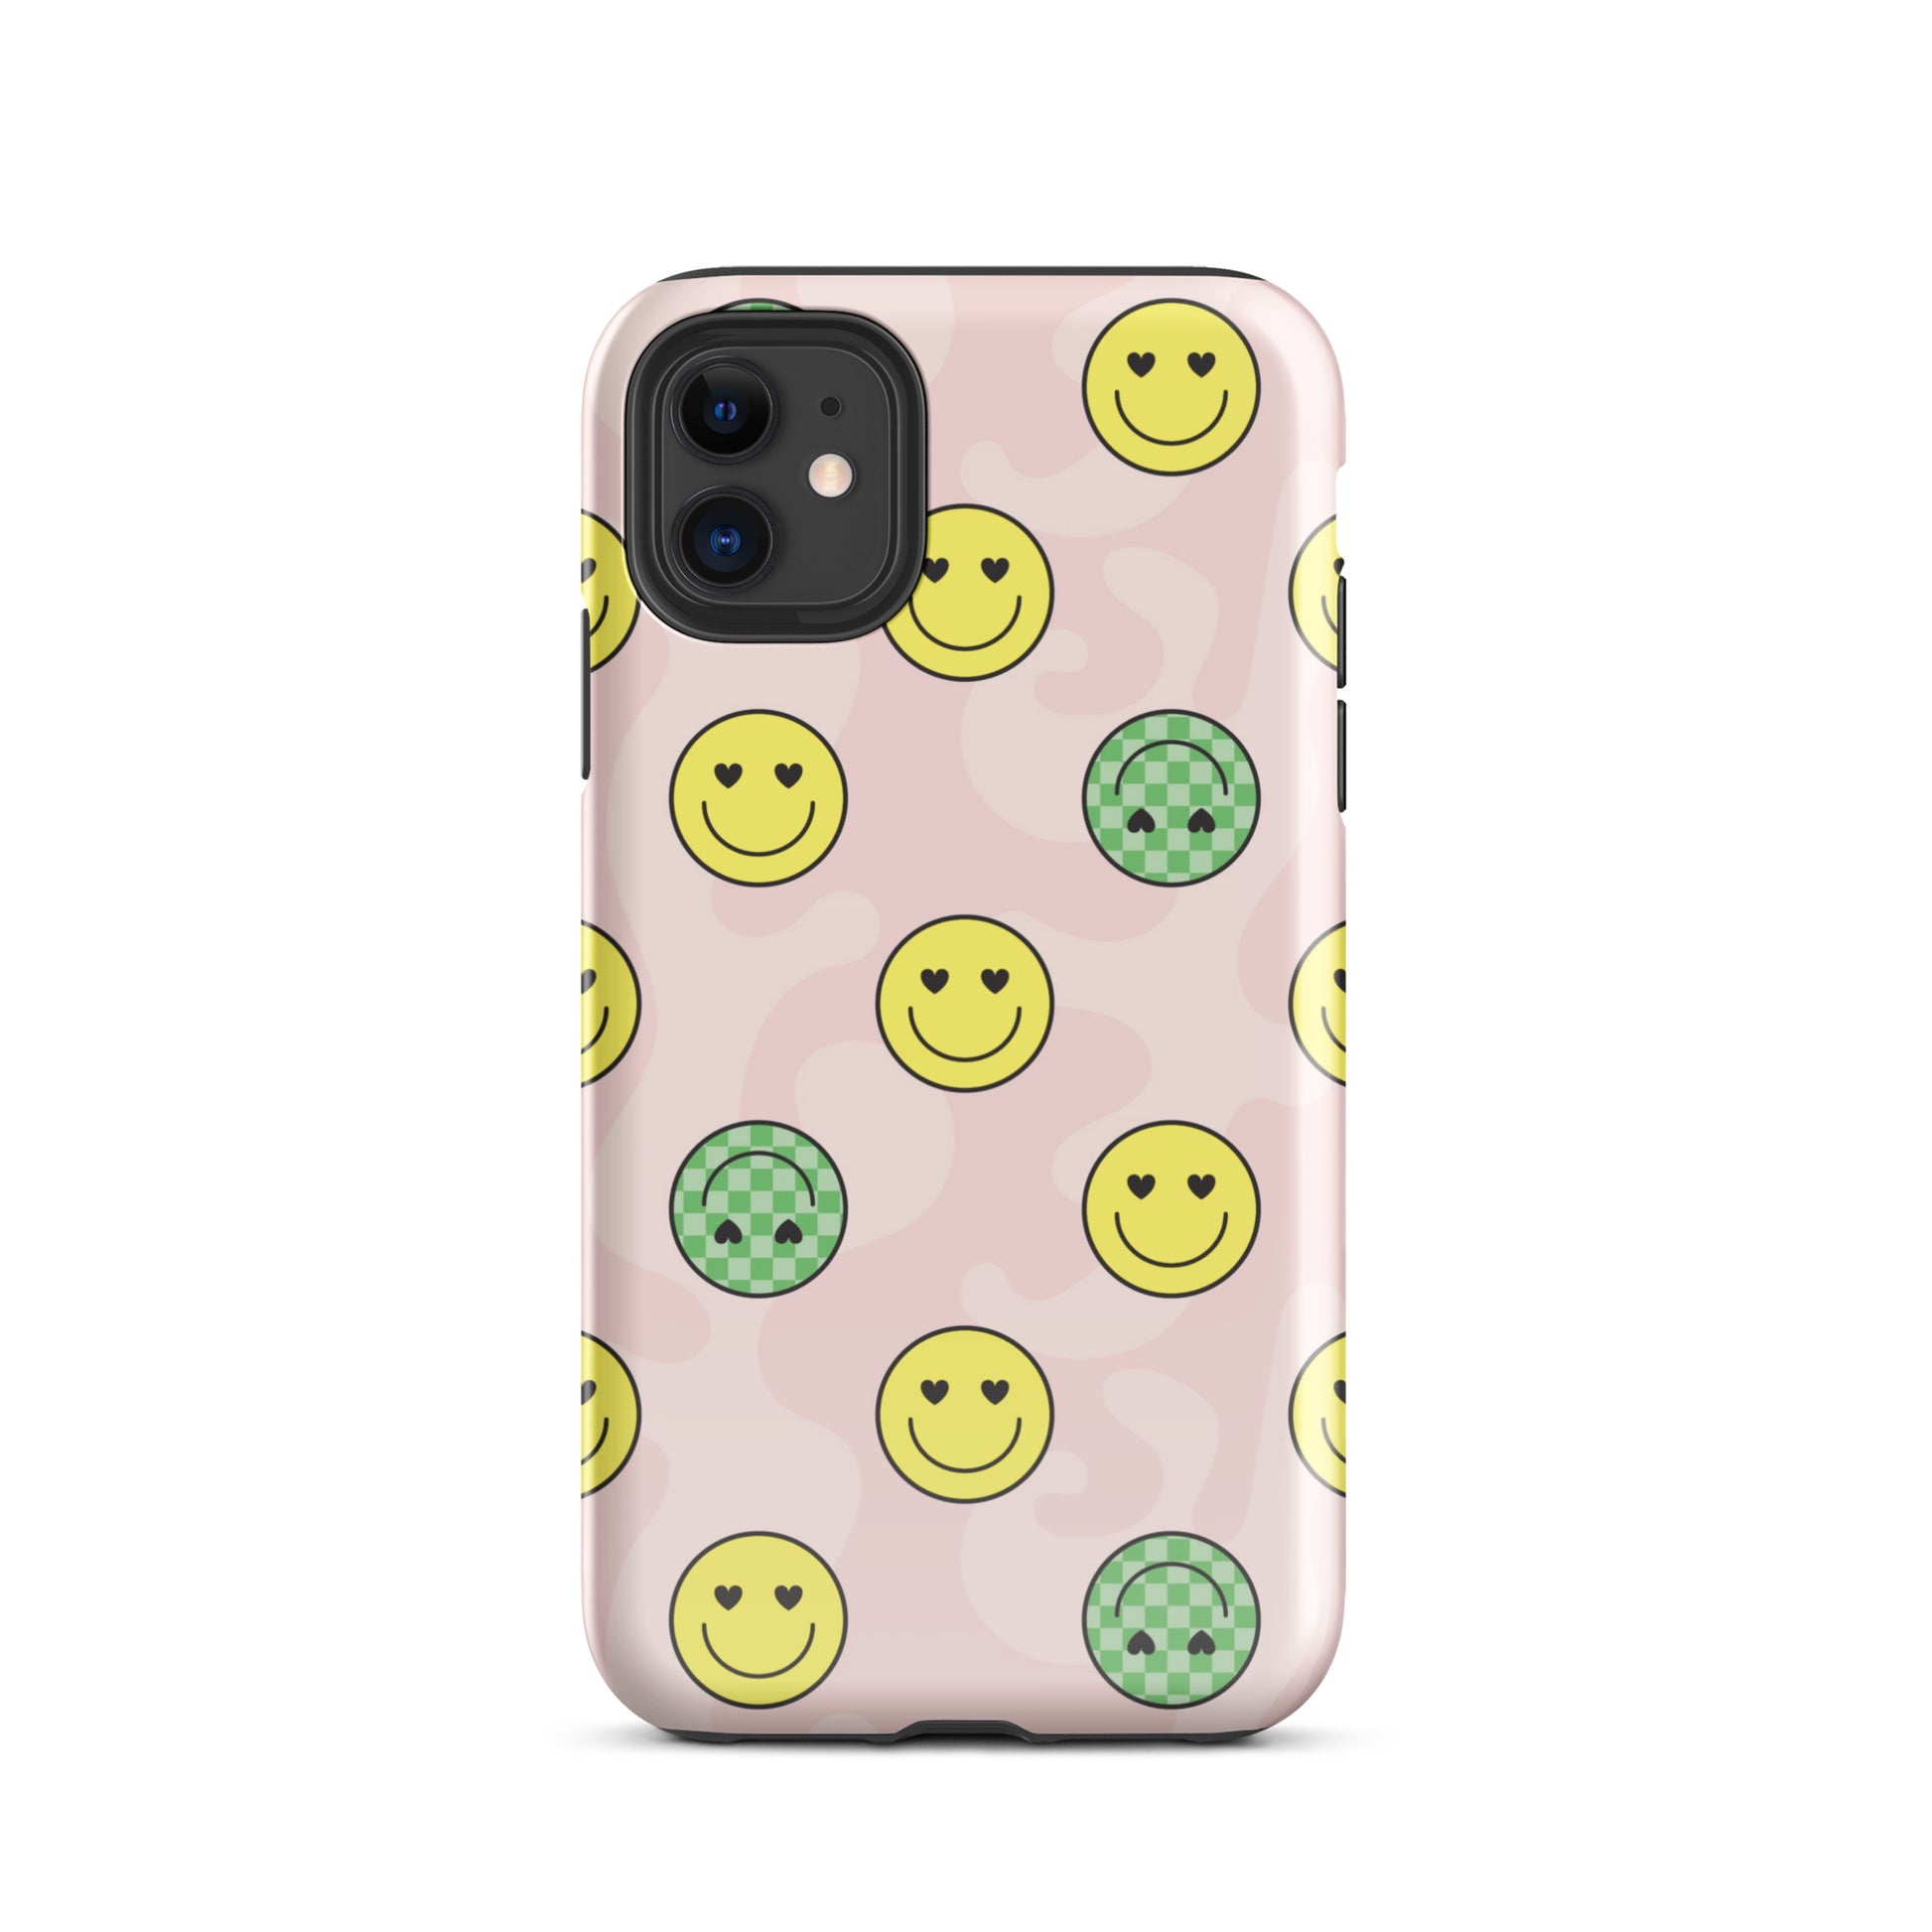 Preppy Smiley Faces iPhone Case iPhone 11 Glossy